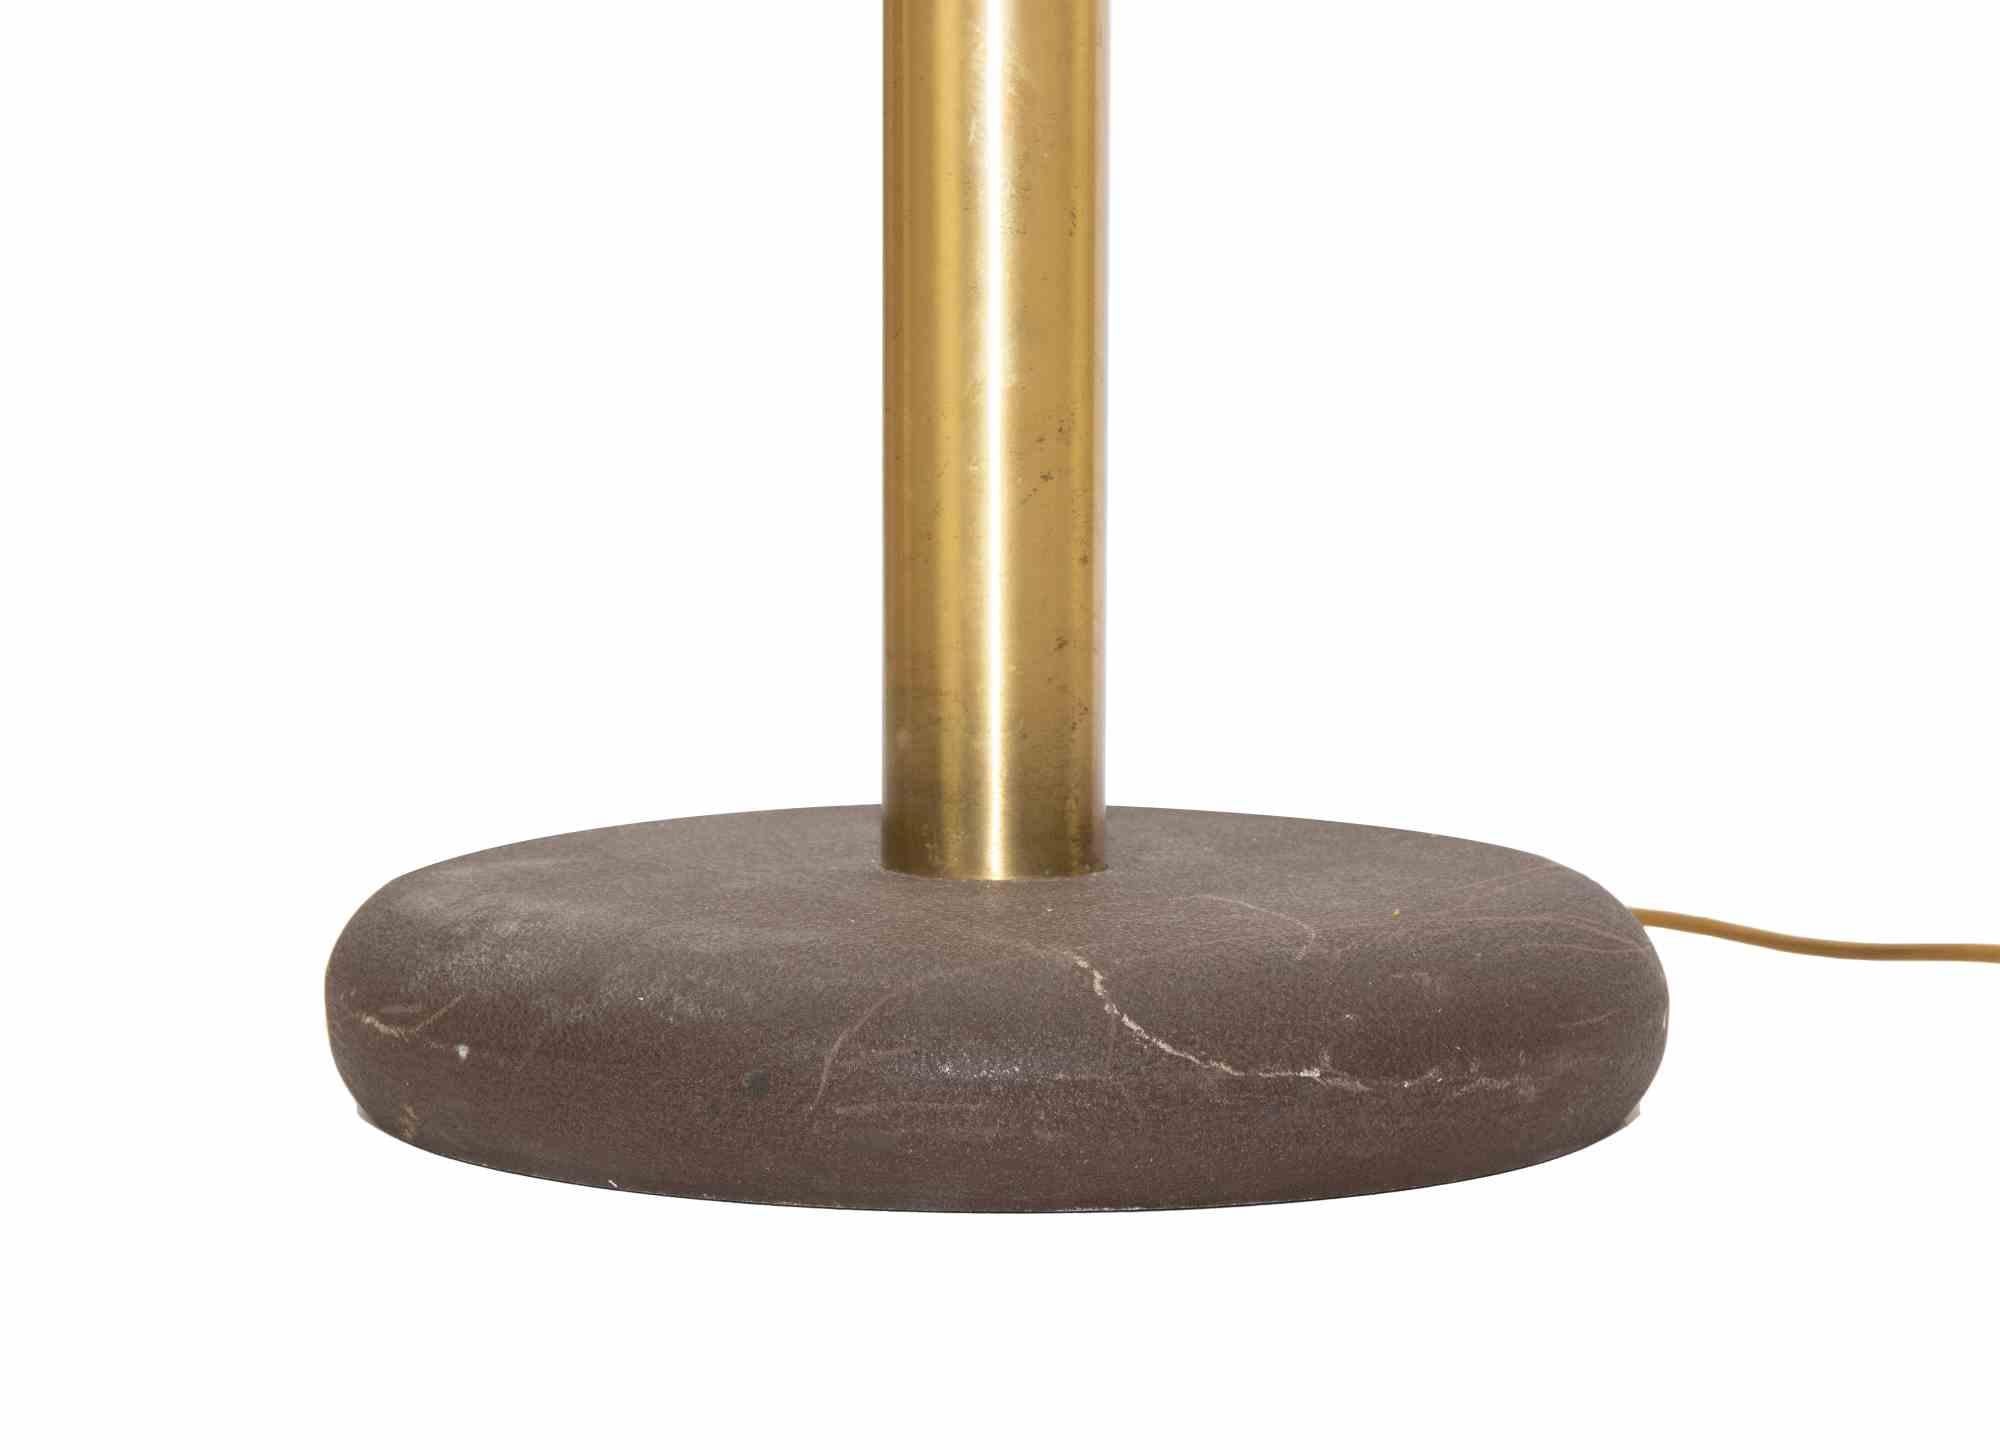 Italian Vintage Brass Floor Lamp Attributed to Goffredo Reggiani, 1970s For Sale